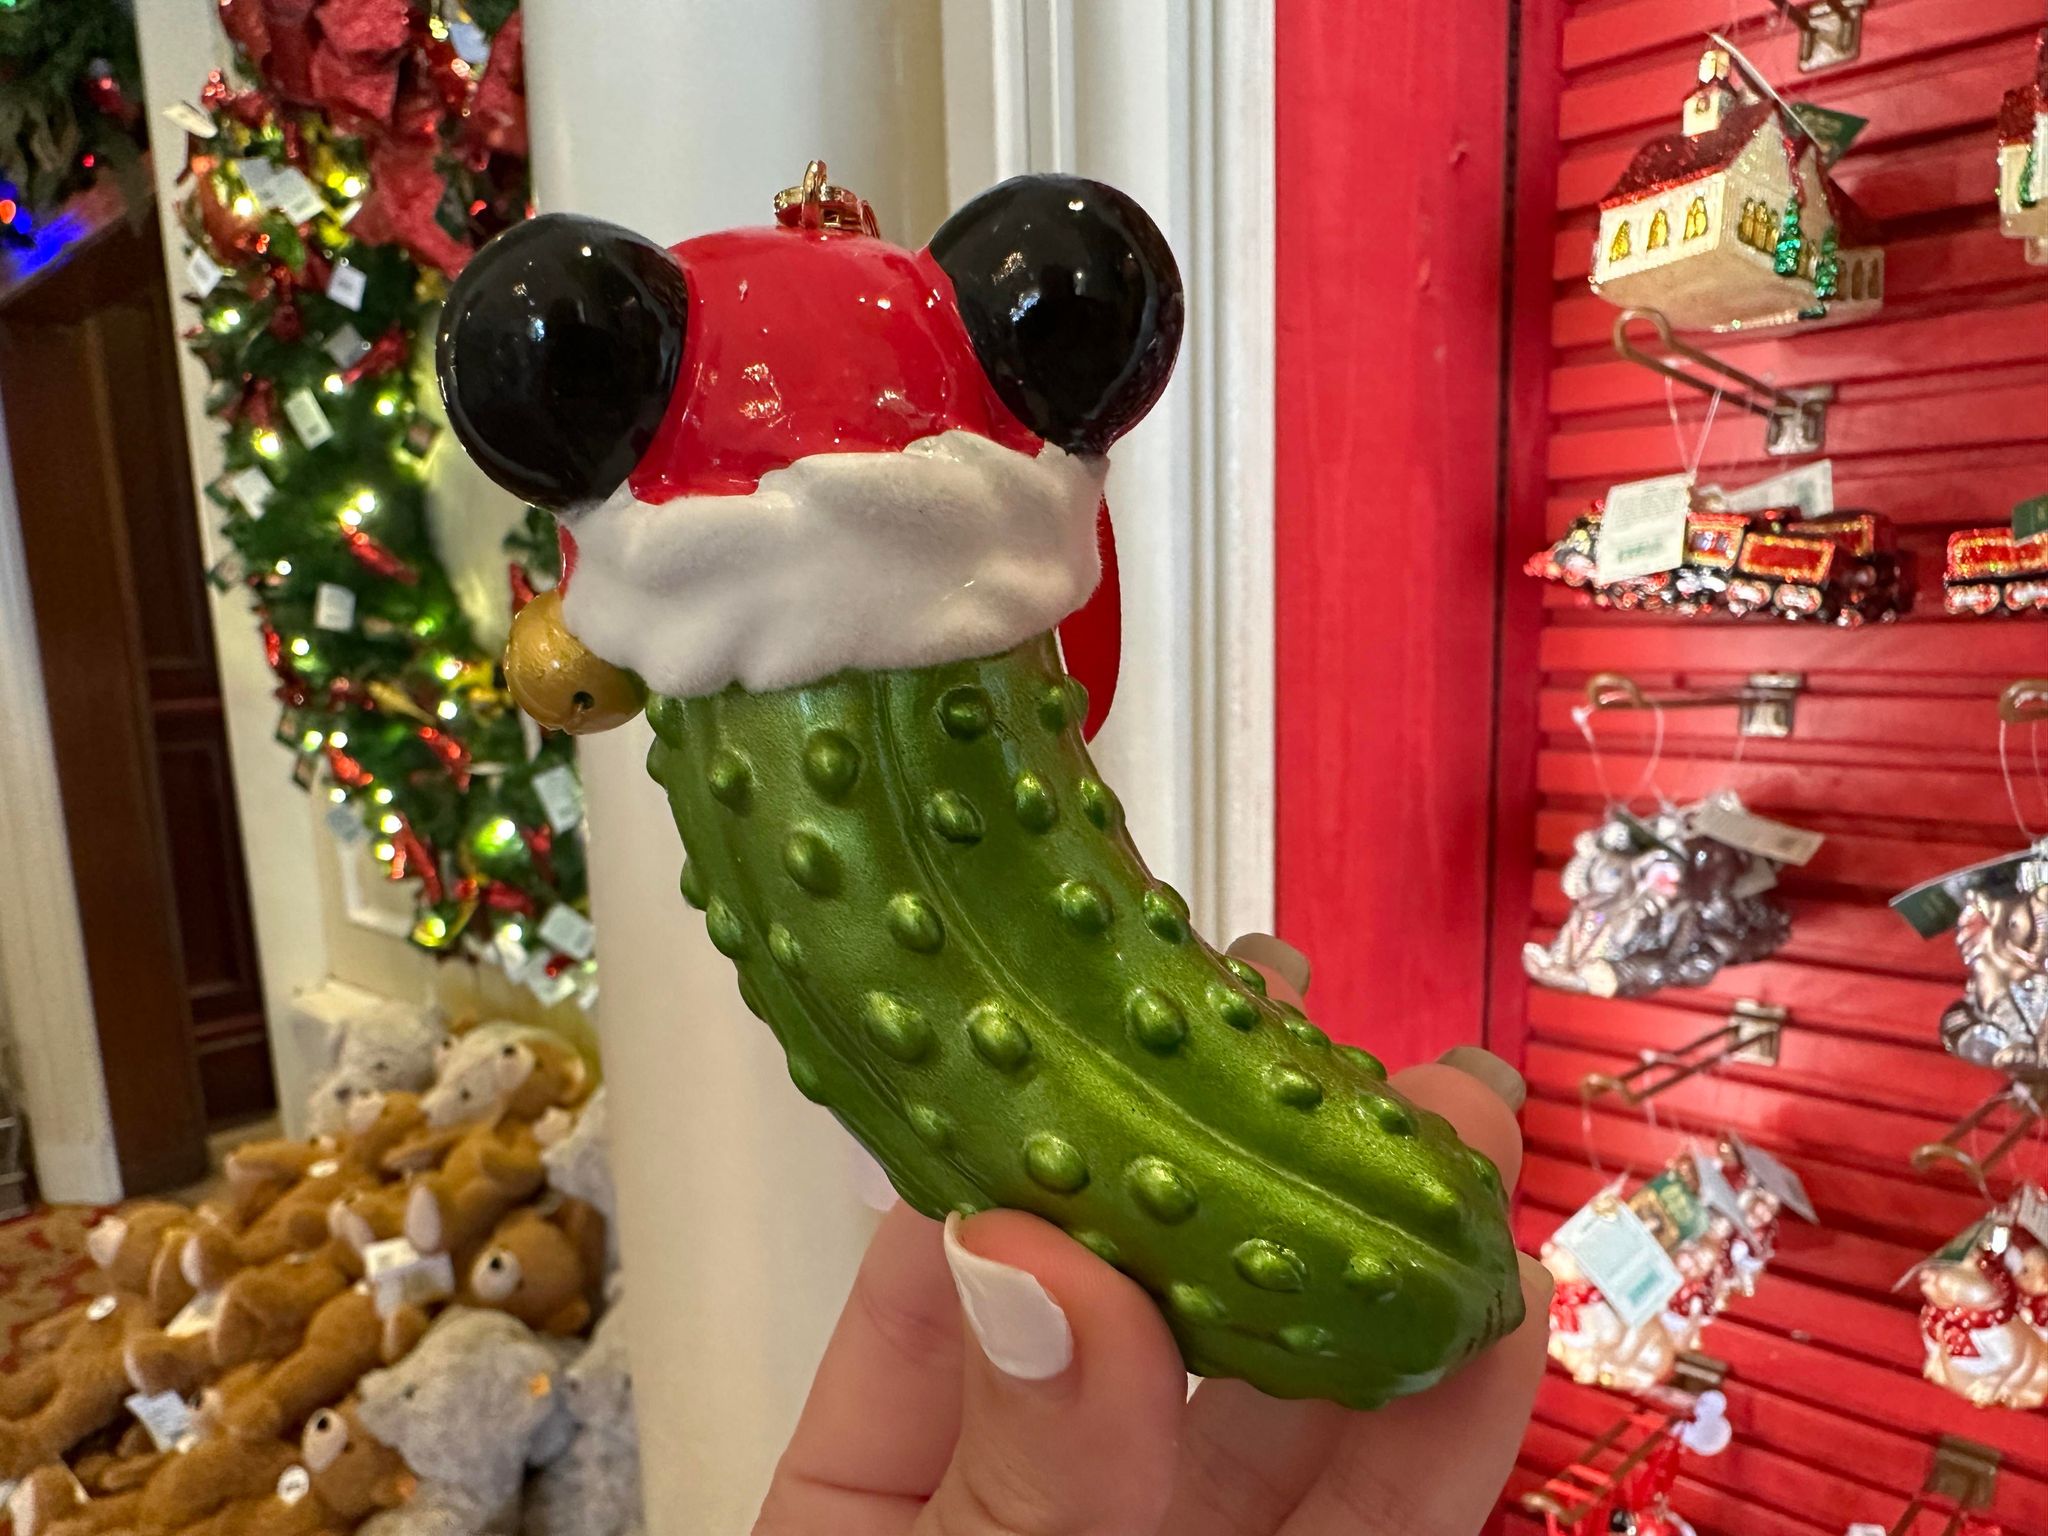 christmas pickle ornament